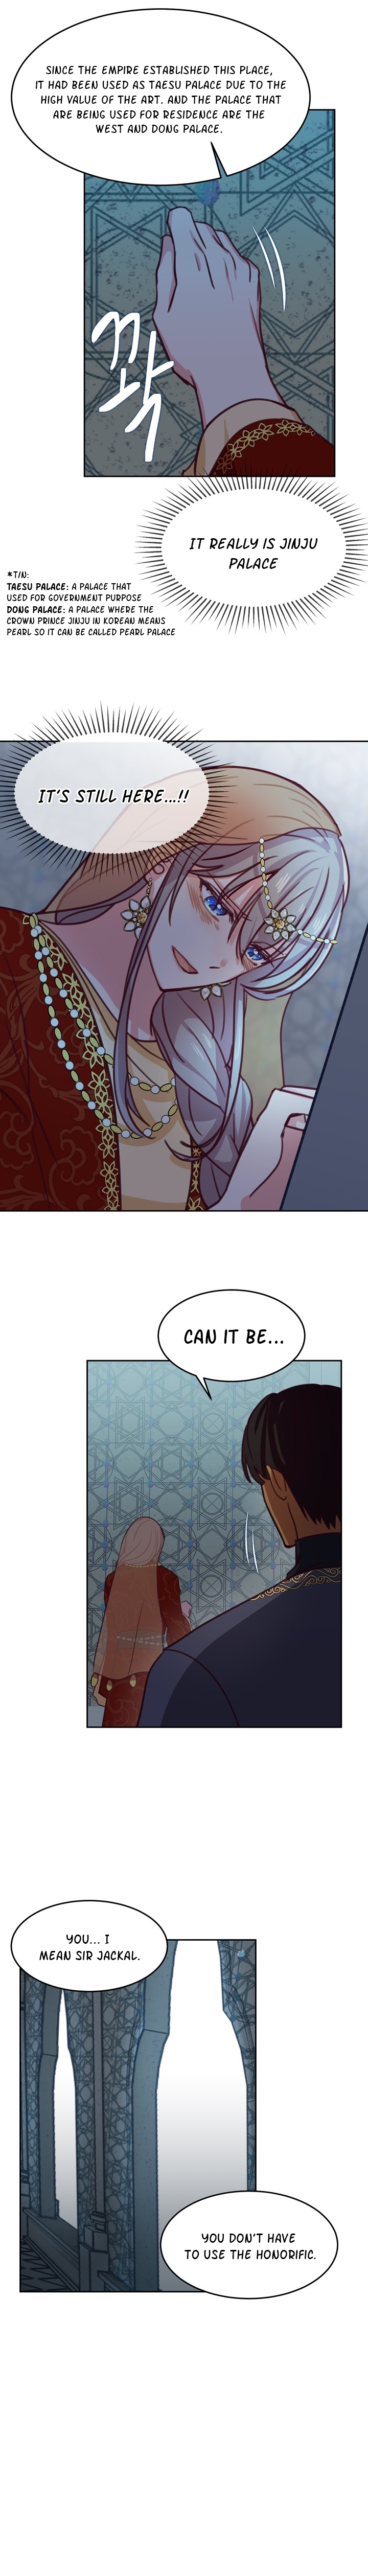 Amina Of The Lamp - Page 3